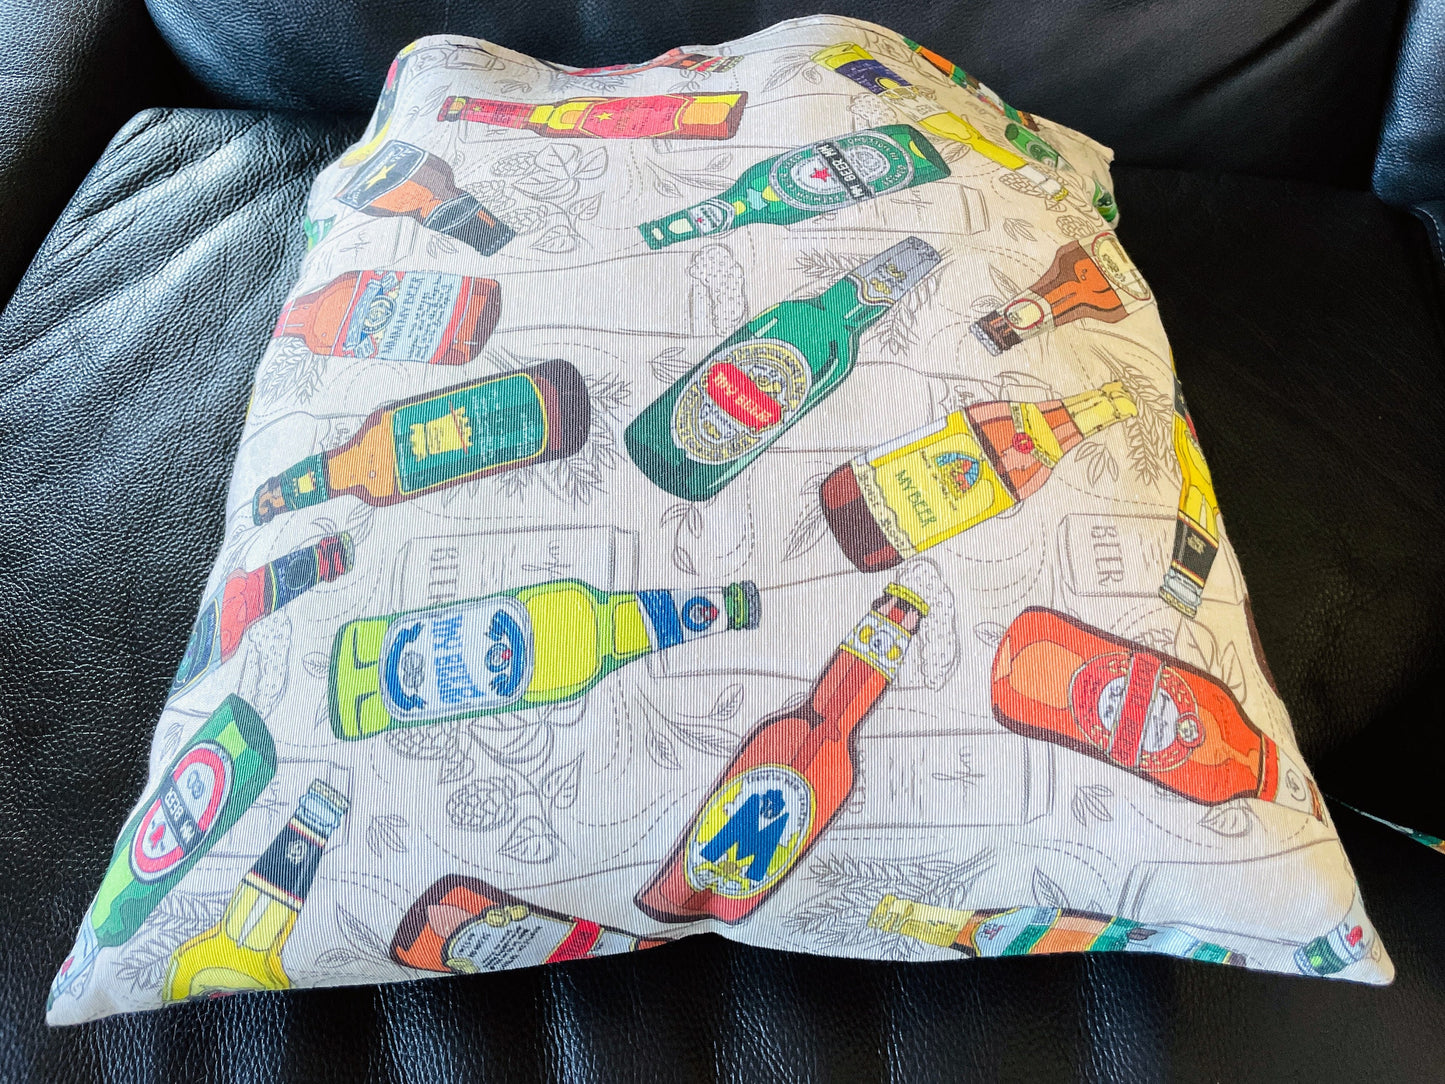 Beer pillow | Pillowcase with beer motif | Sofa cushion with beer bottle design | Fabric pillow | Decorative pillow | Handmade | 40x40 cm